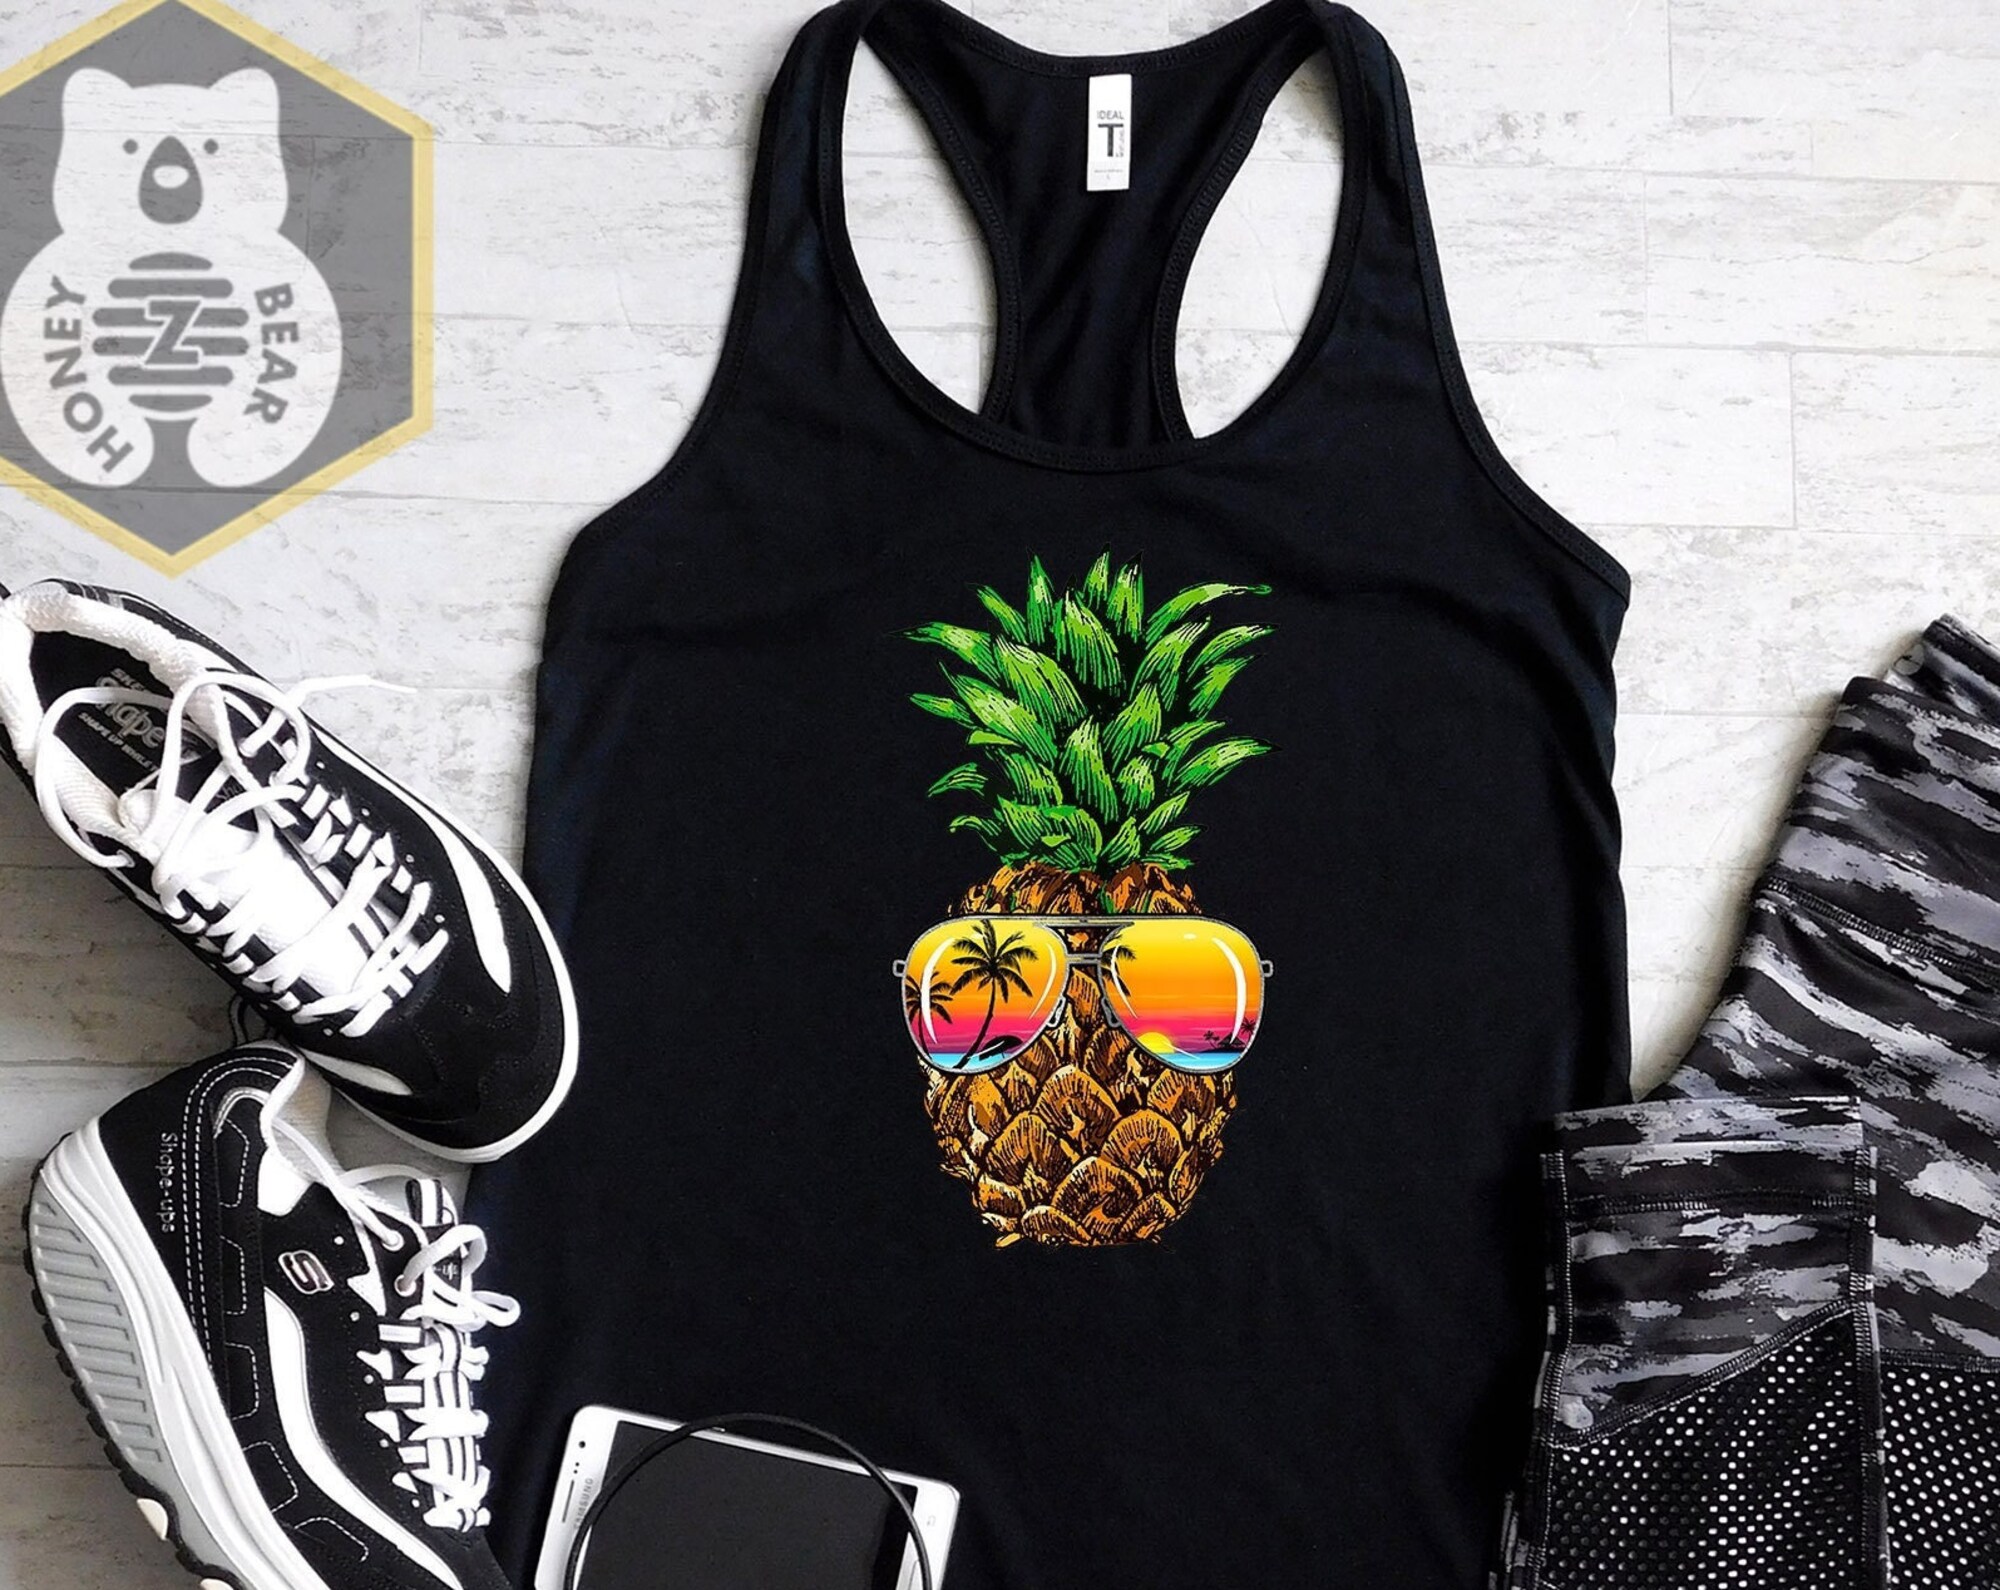 Discover Sunglasses Pineapple Tank Top